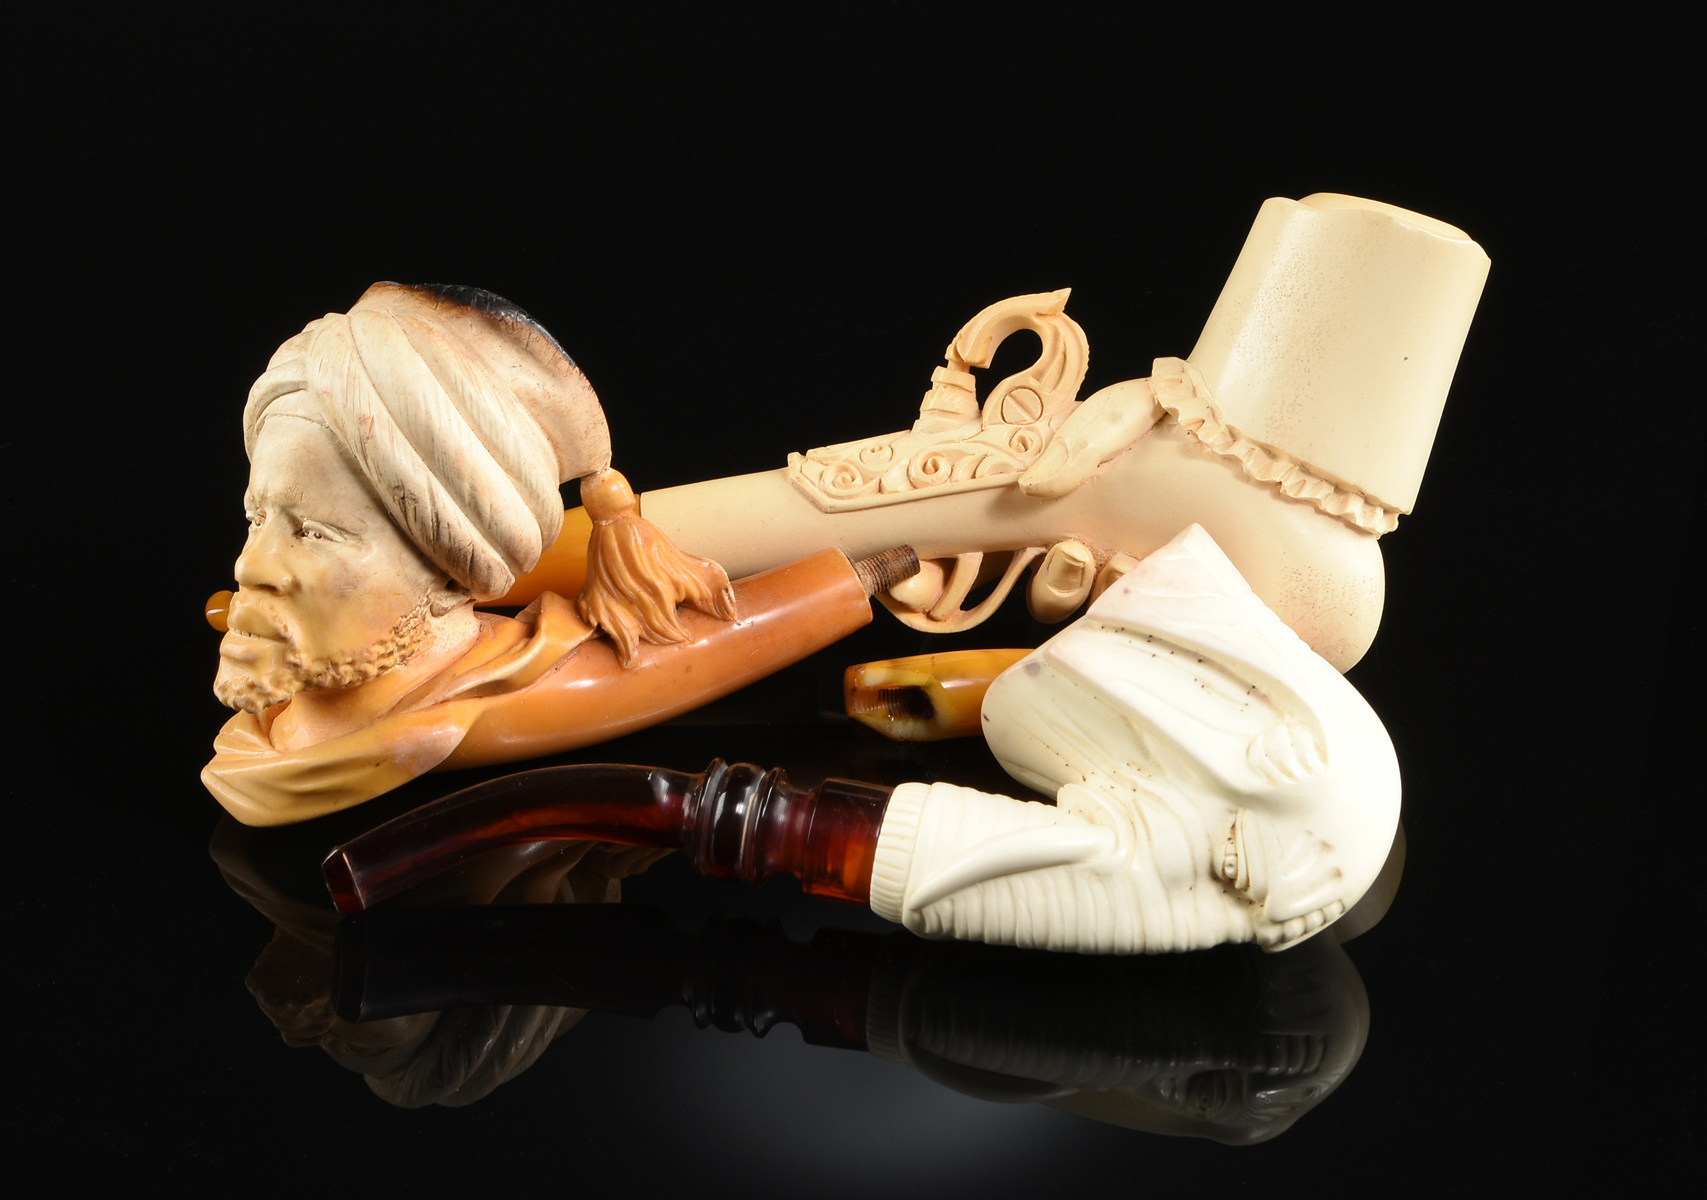 A GROUP OF THREE MEERSCHAUM TOBACCO PIPES, LATE 19TH/EARLY 20TH CENTURY, carved in the form of a